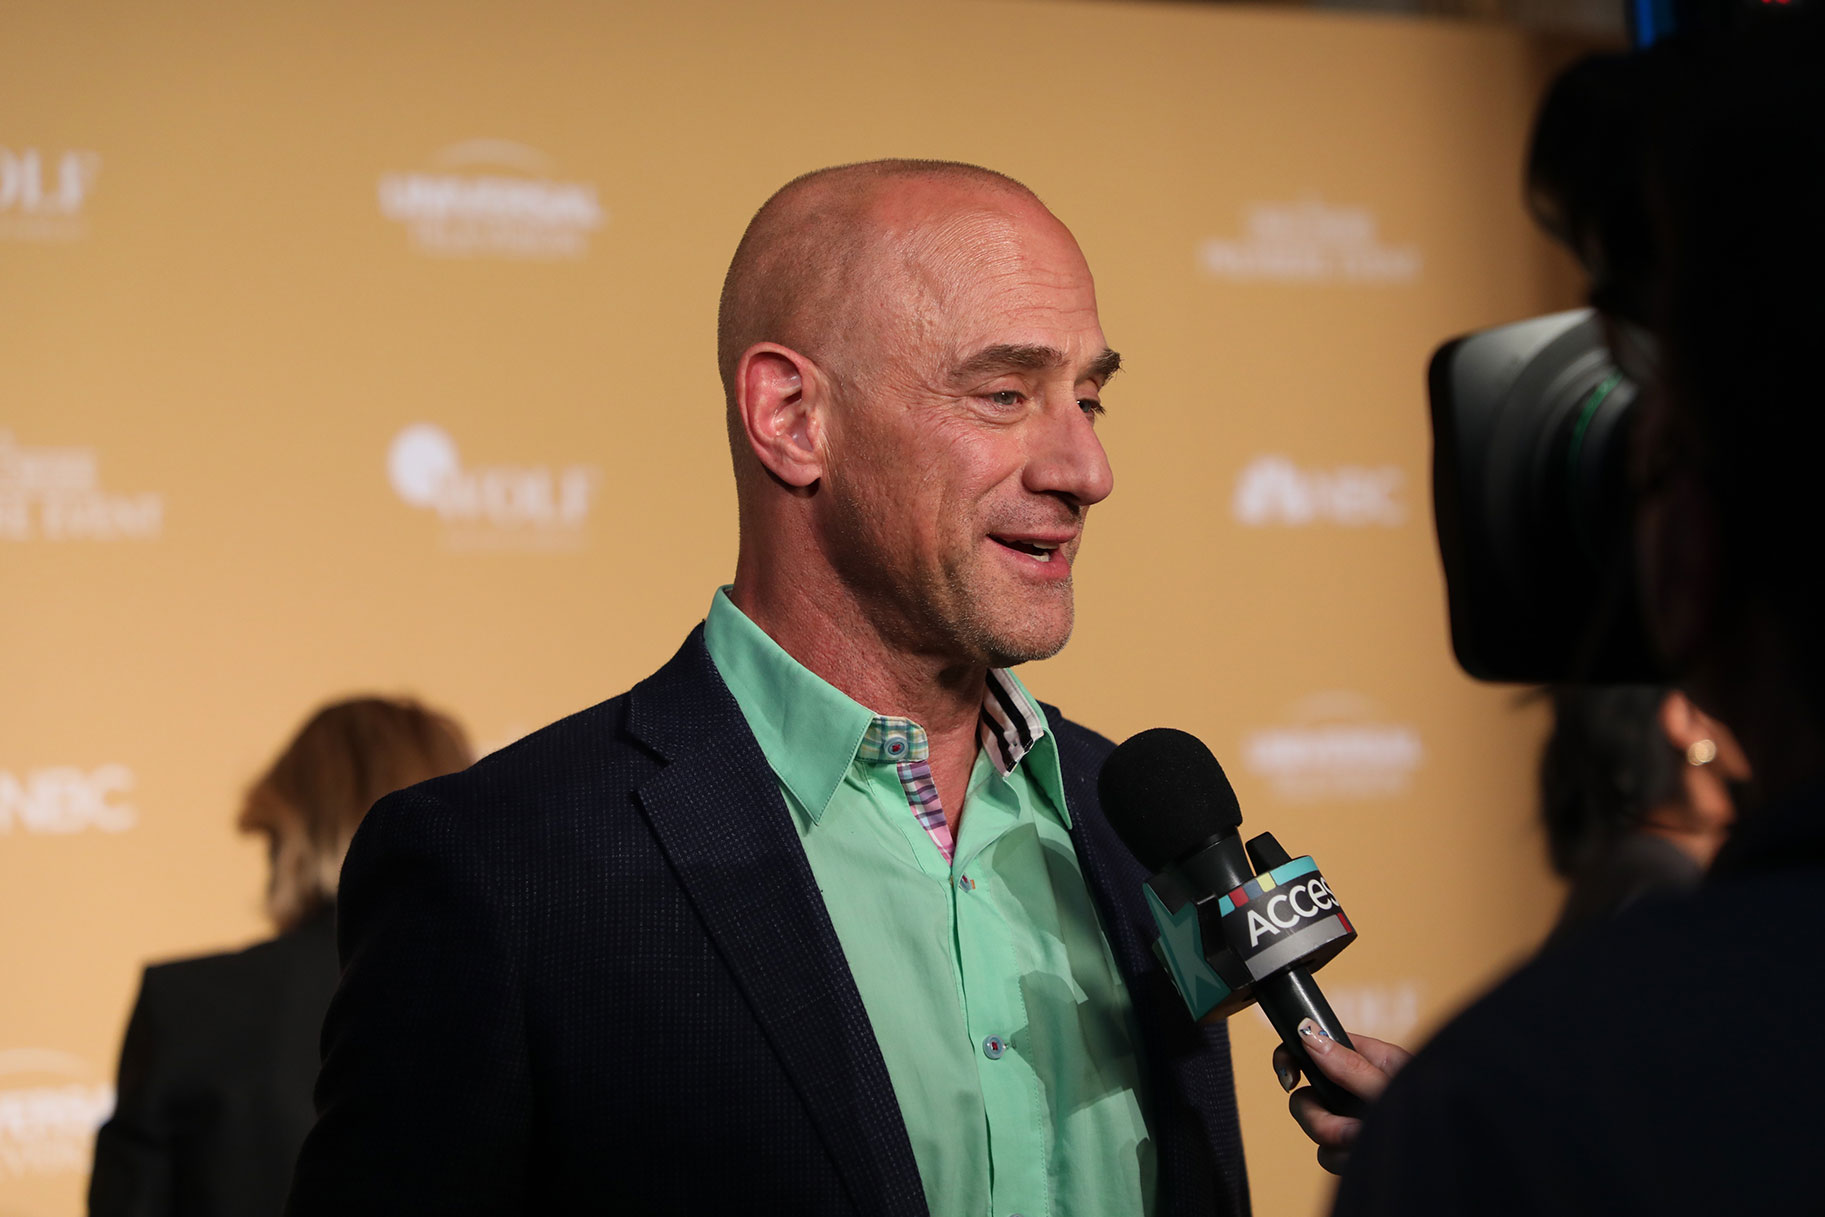 Chris Meloni being interviewed on a red carpet